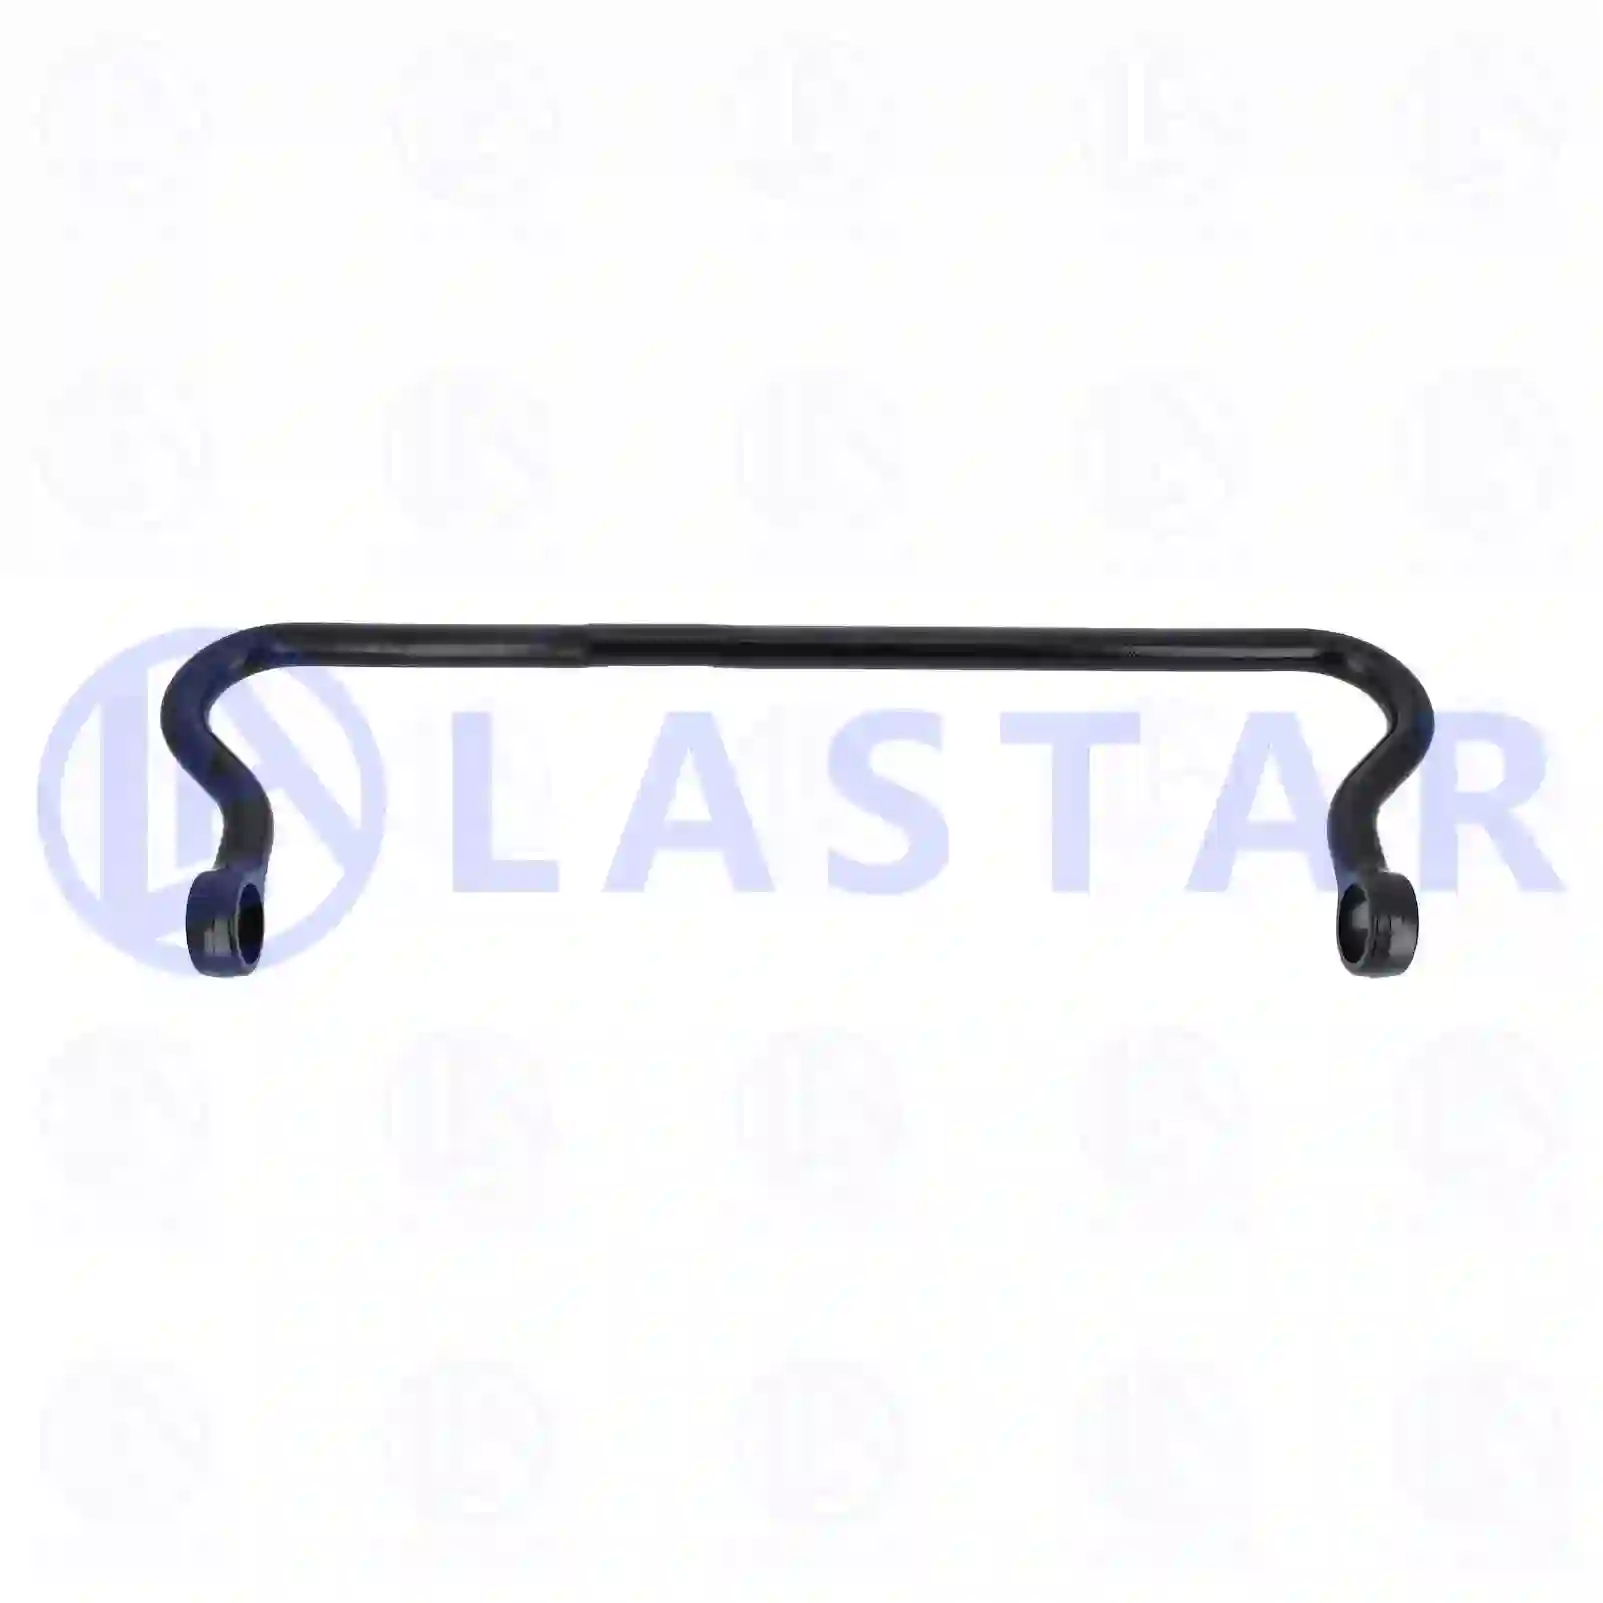 Stabilizer, 77728016, 3753230165, 94332 ||  77728016 Lastar Spare Part | Truck Spare Parts, Auotomotive Spare Parts Stabilizer, 77728016, 3753230165, 94332 ||  77728016 Lastar Spare Part | Truck Spare Parts, Auotomotive Spare Parts